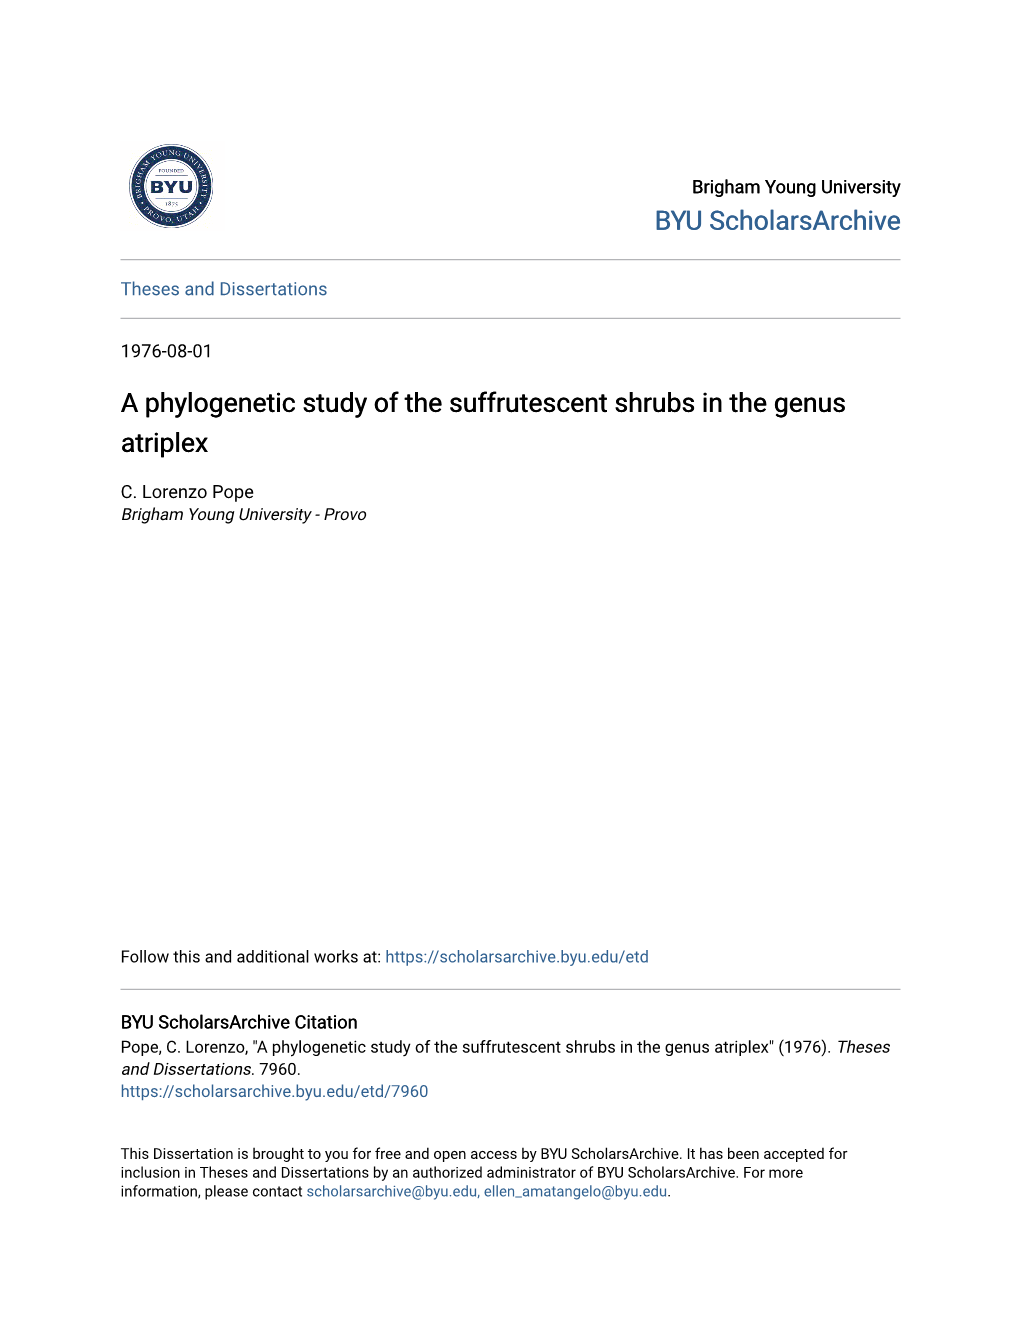 A Phylogenetic Study of the Suffrutescent Shrubs in the Genus Atriplex